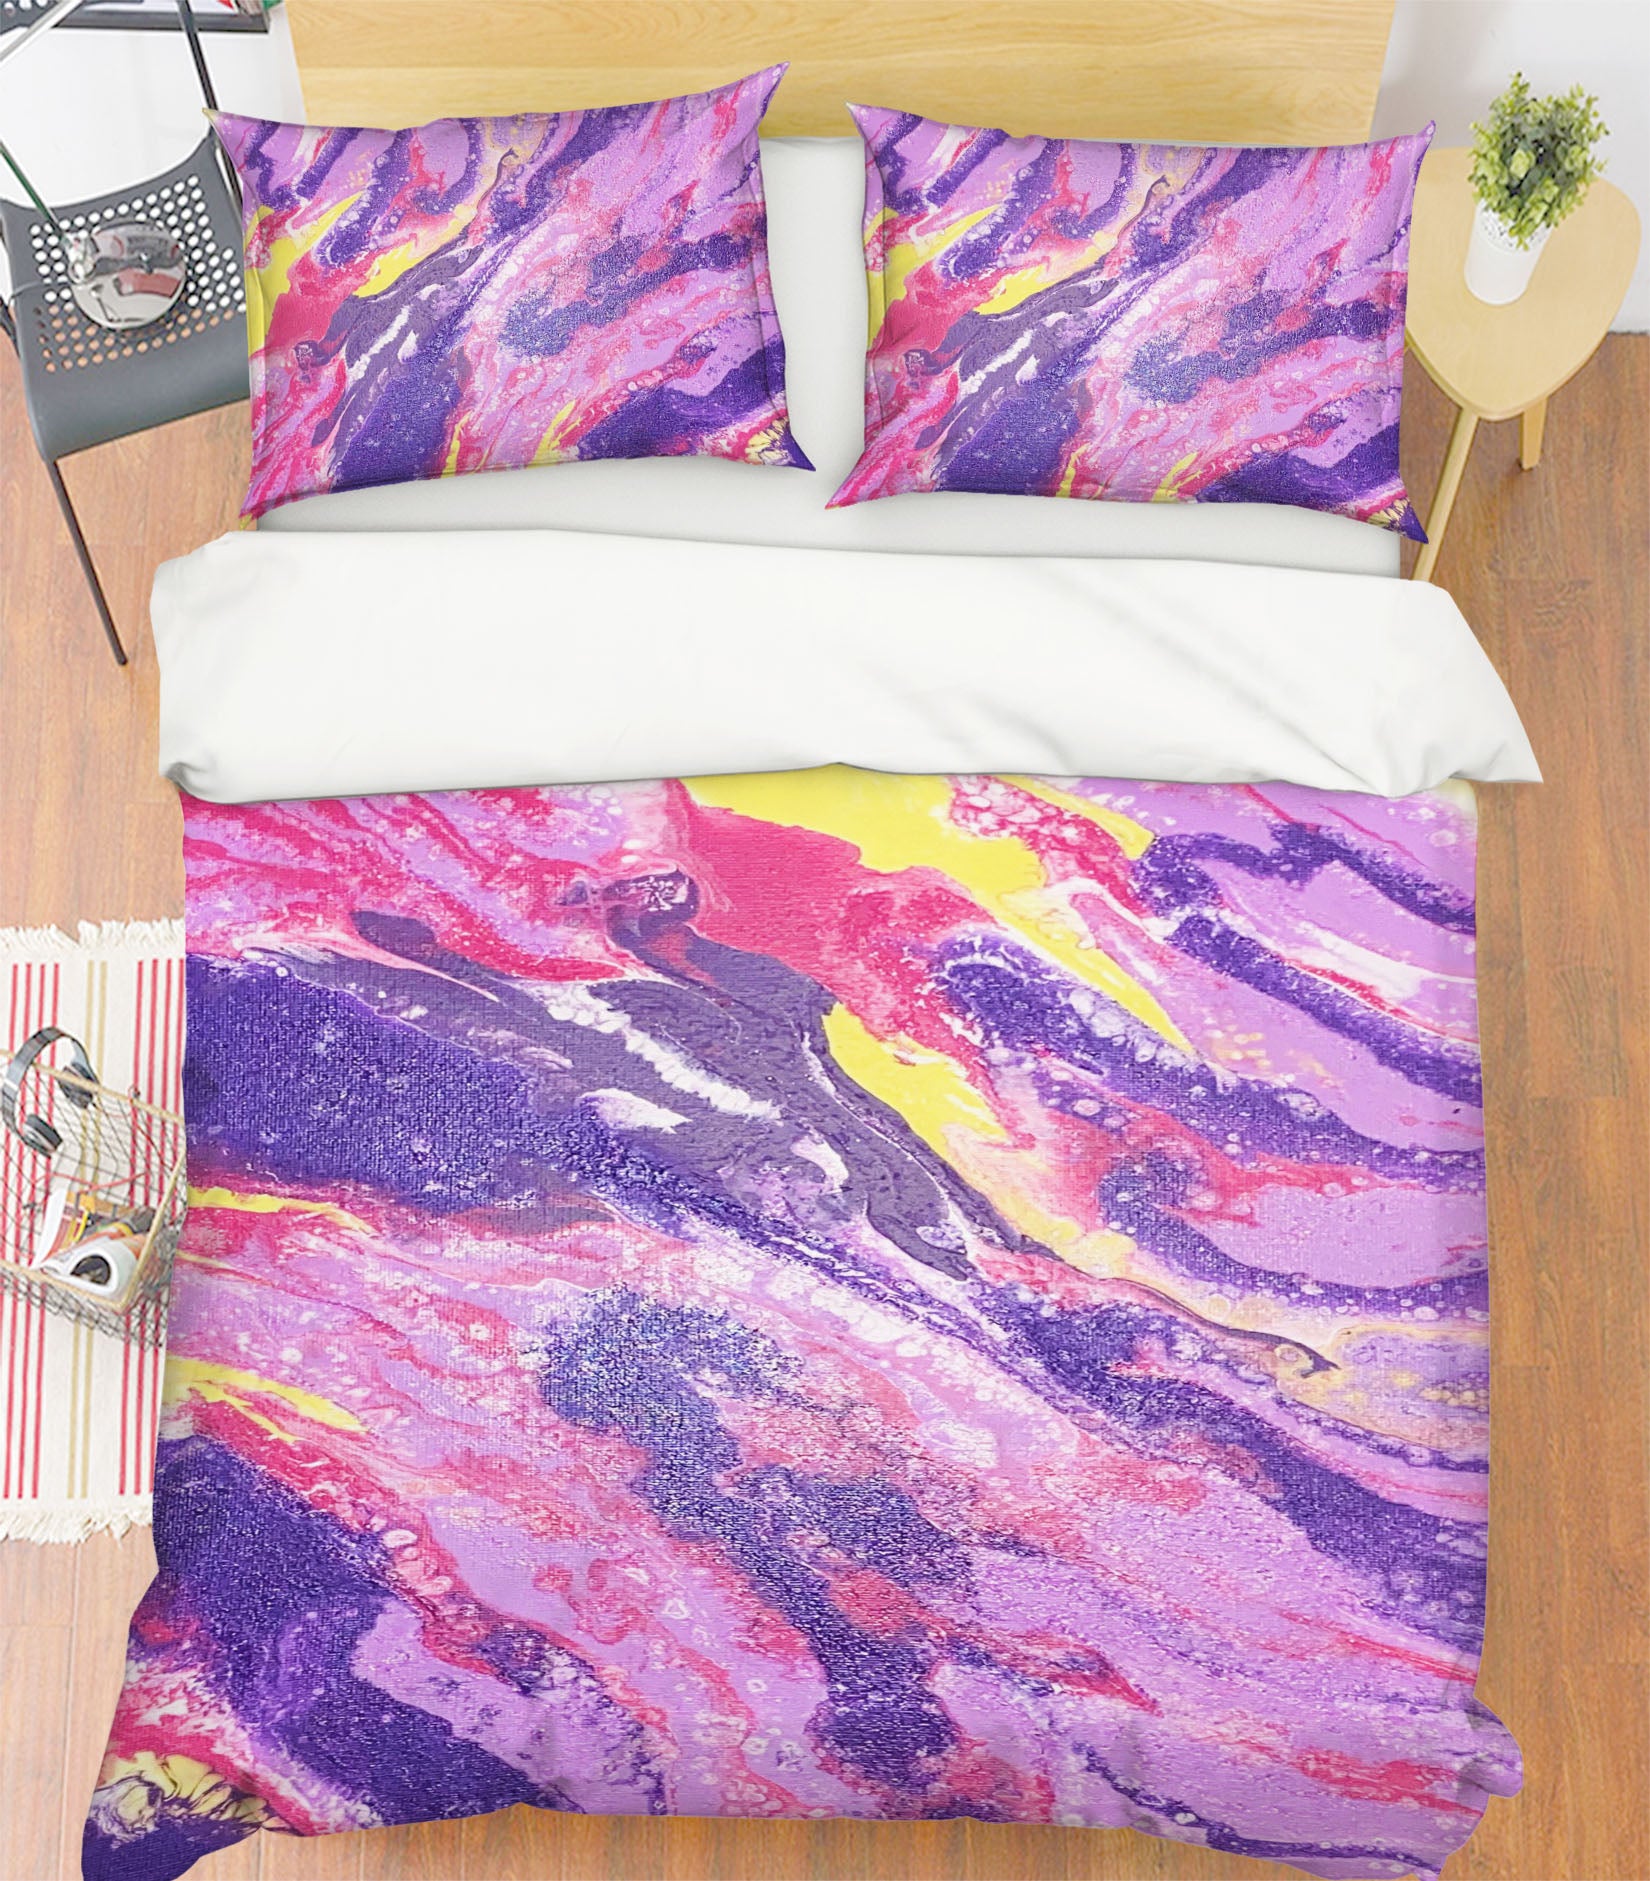 3D Purple Pink Pattern 40056 Valerie Latrice Bedding Bed Pillowcases Quilt